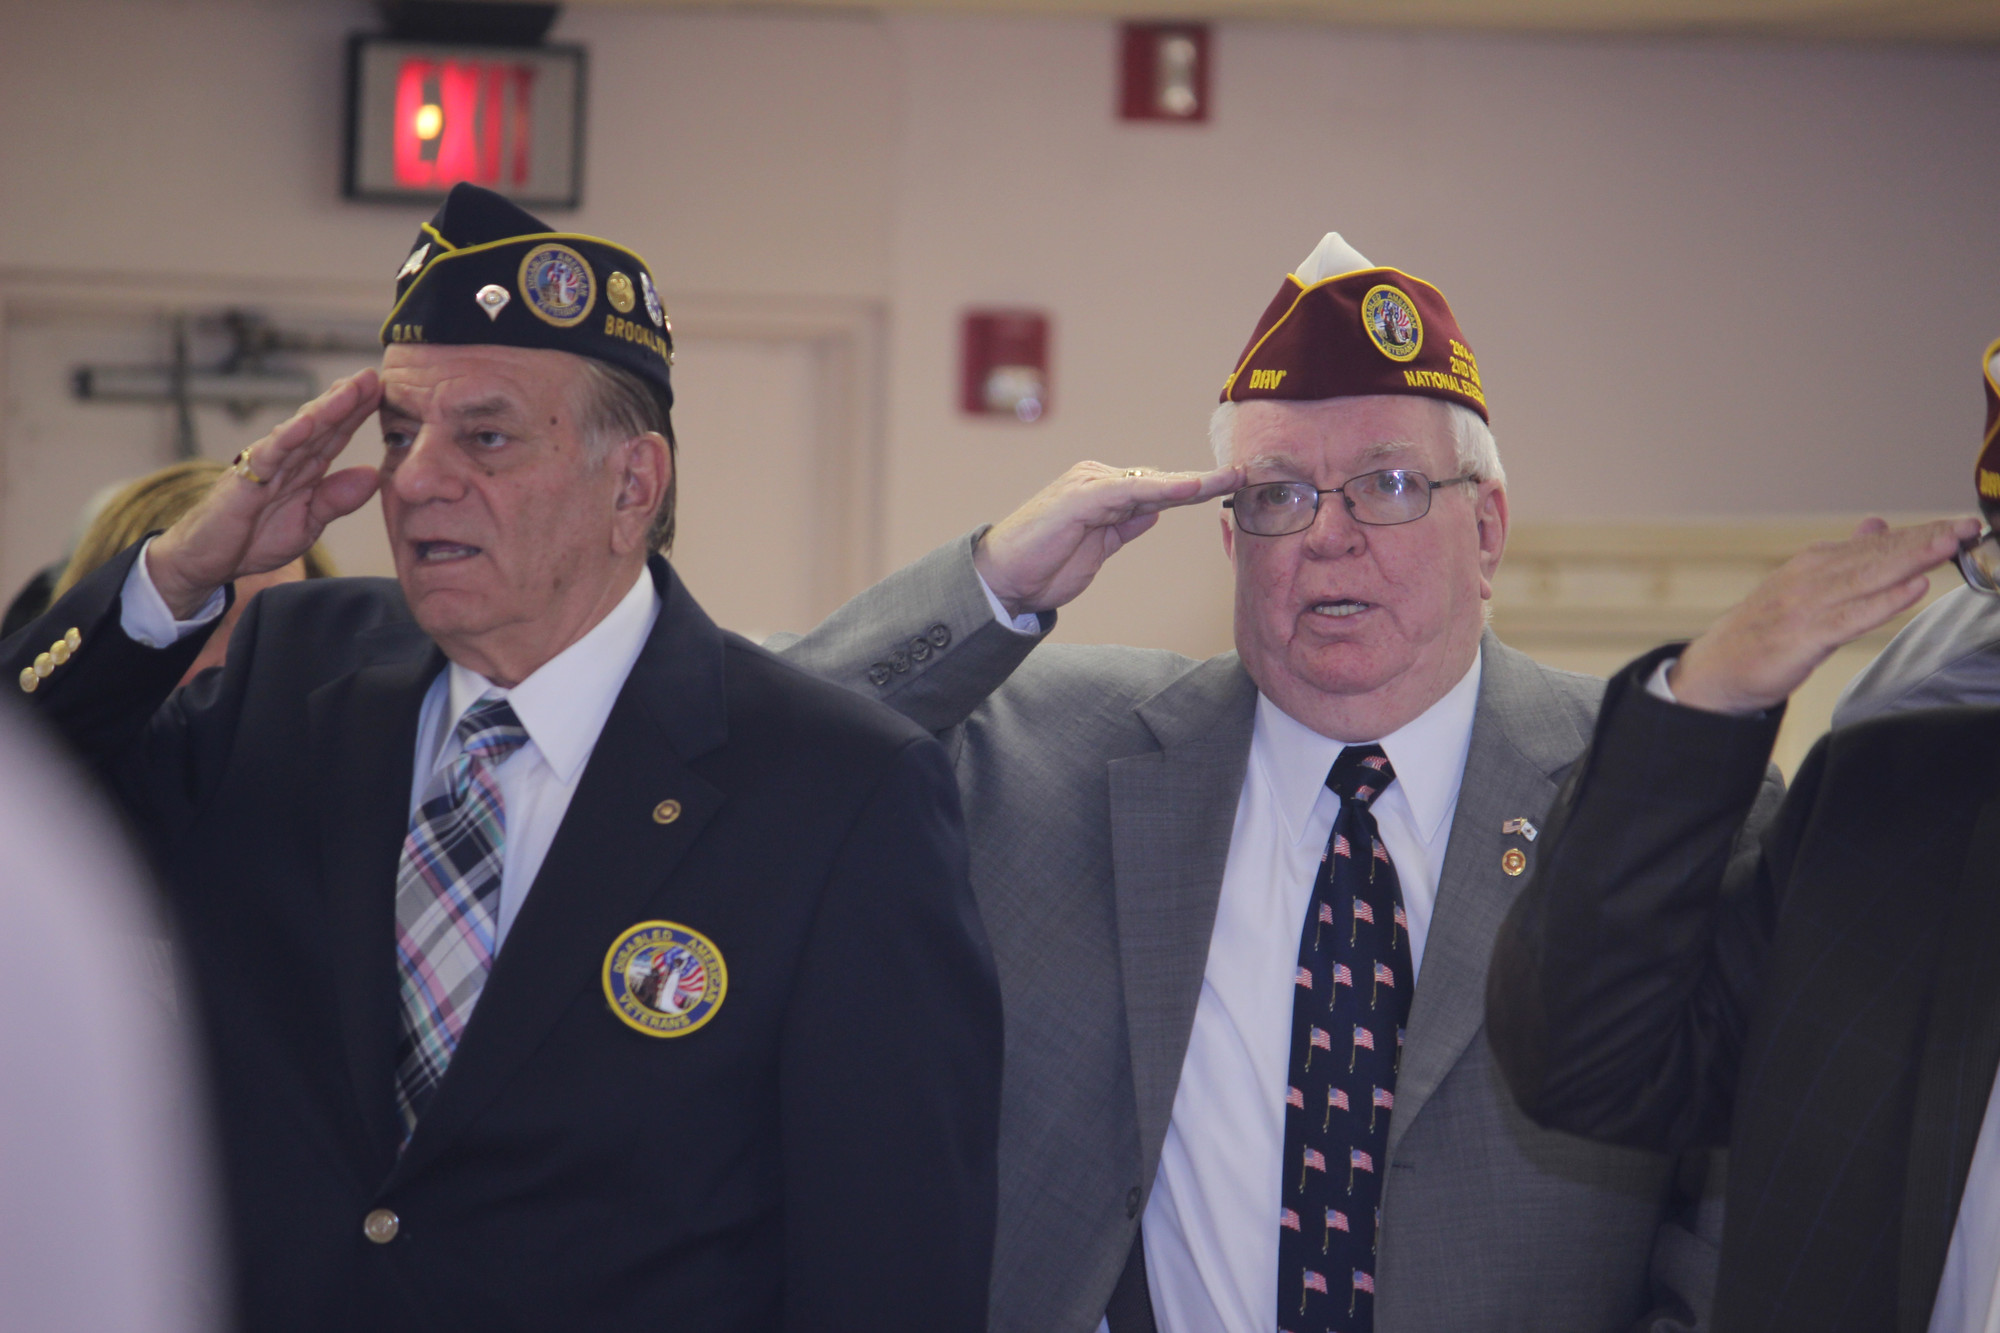 L Army veterans Tom Ingram, left, and Robert Finnerty saluted the flag during a ceremony before the luncheon at the Sandel Senior Center.